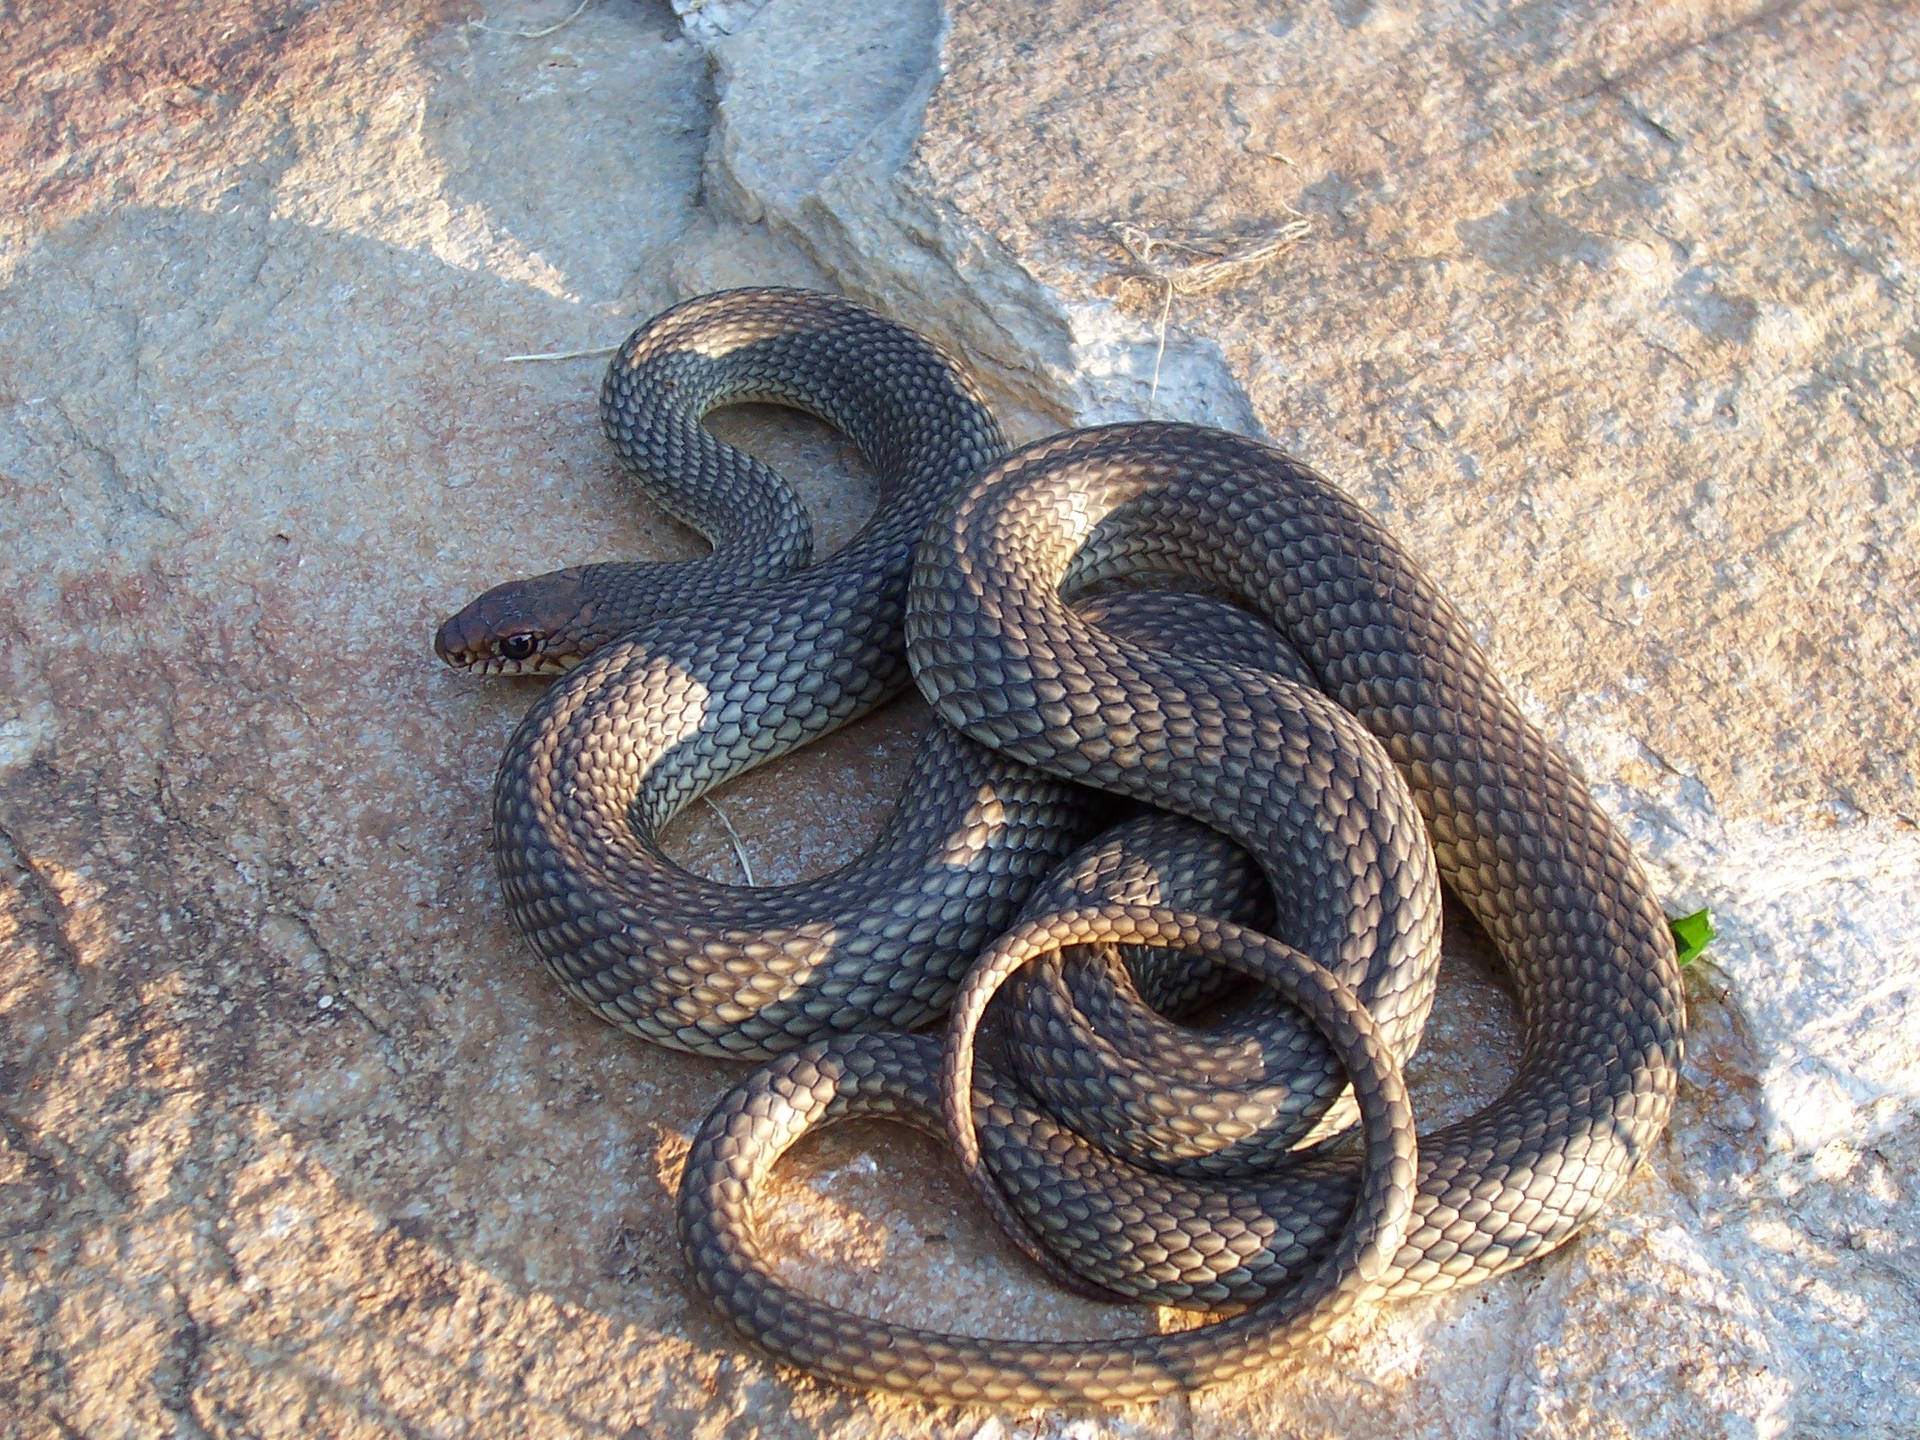 Caspian Whipsnake Coiled Nature Photography Wallpaper